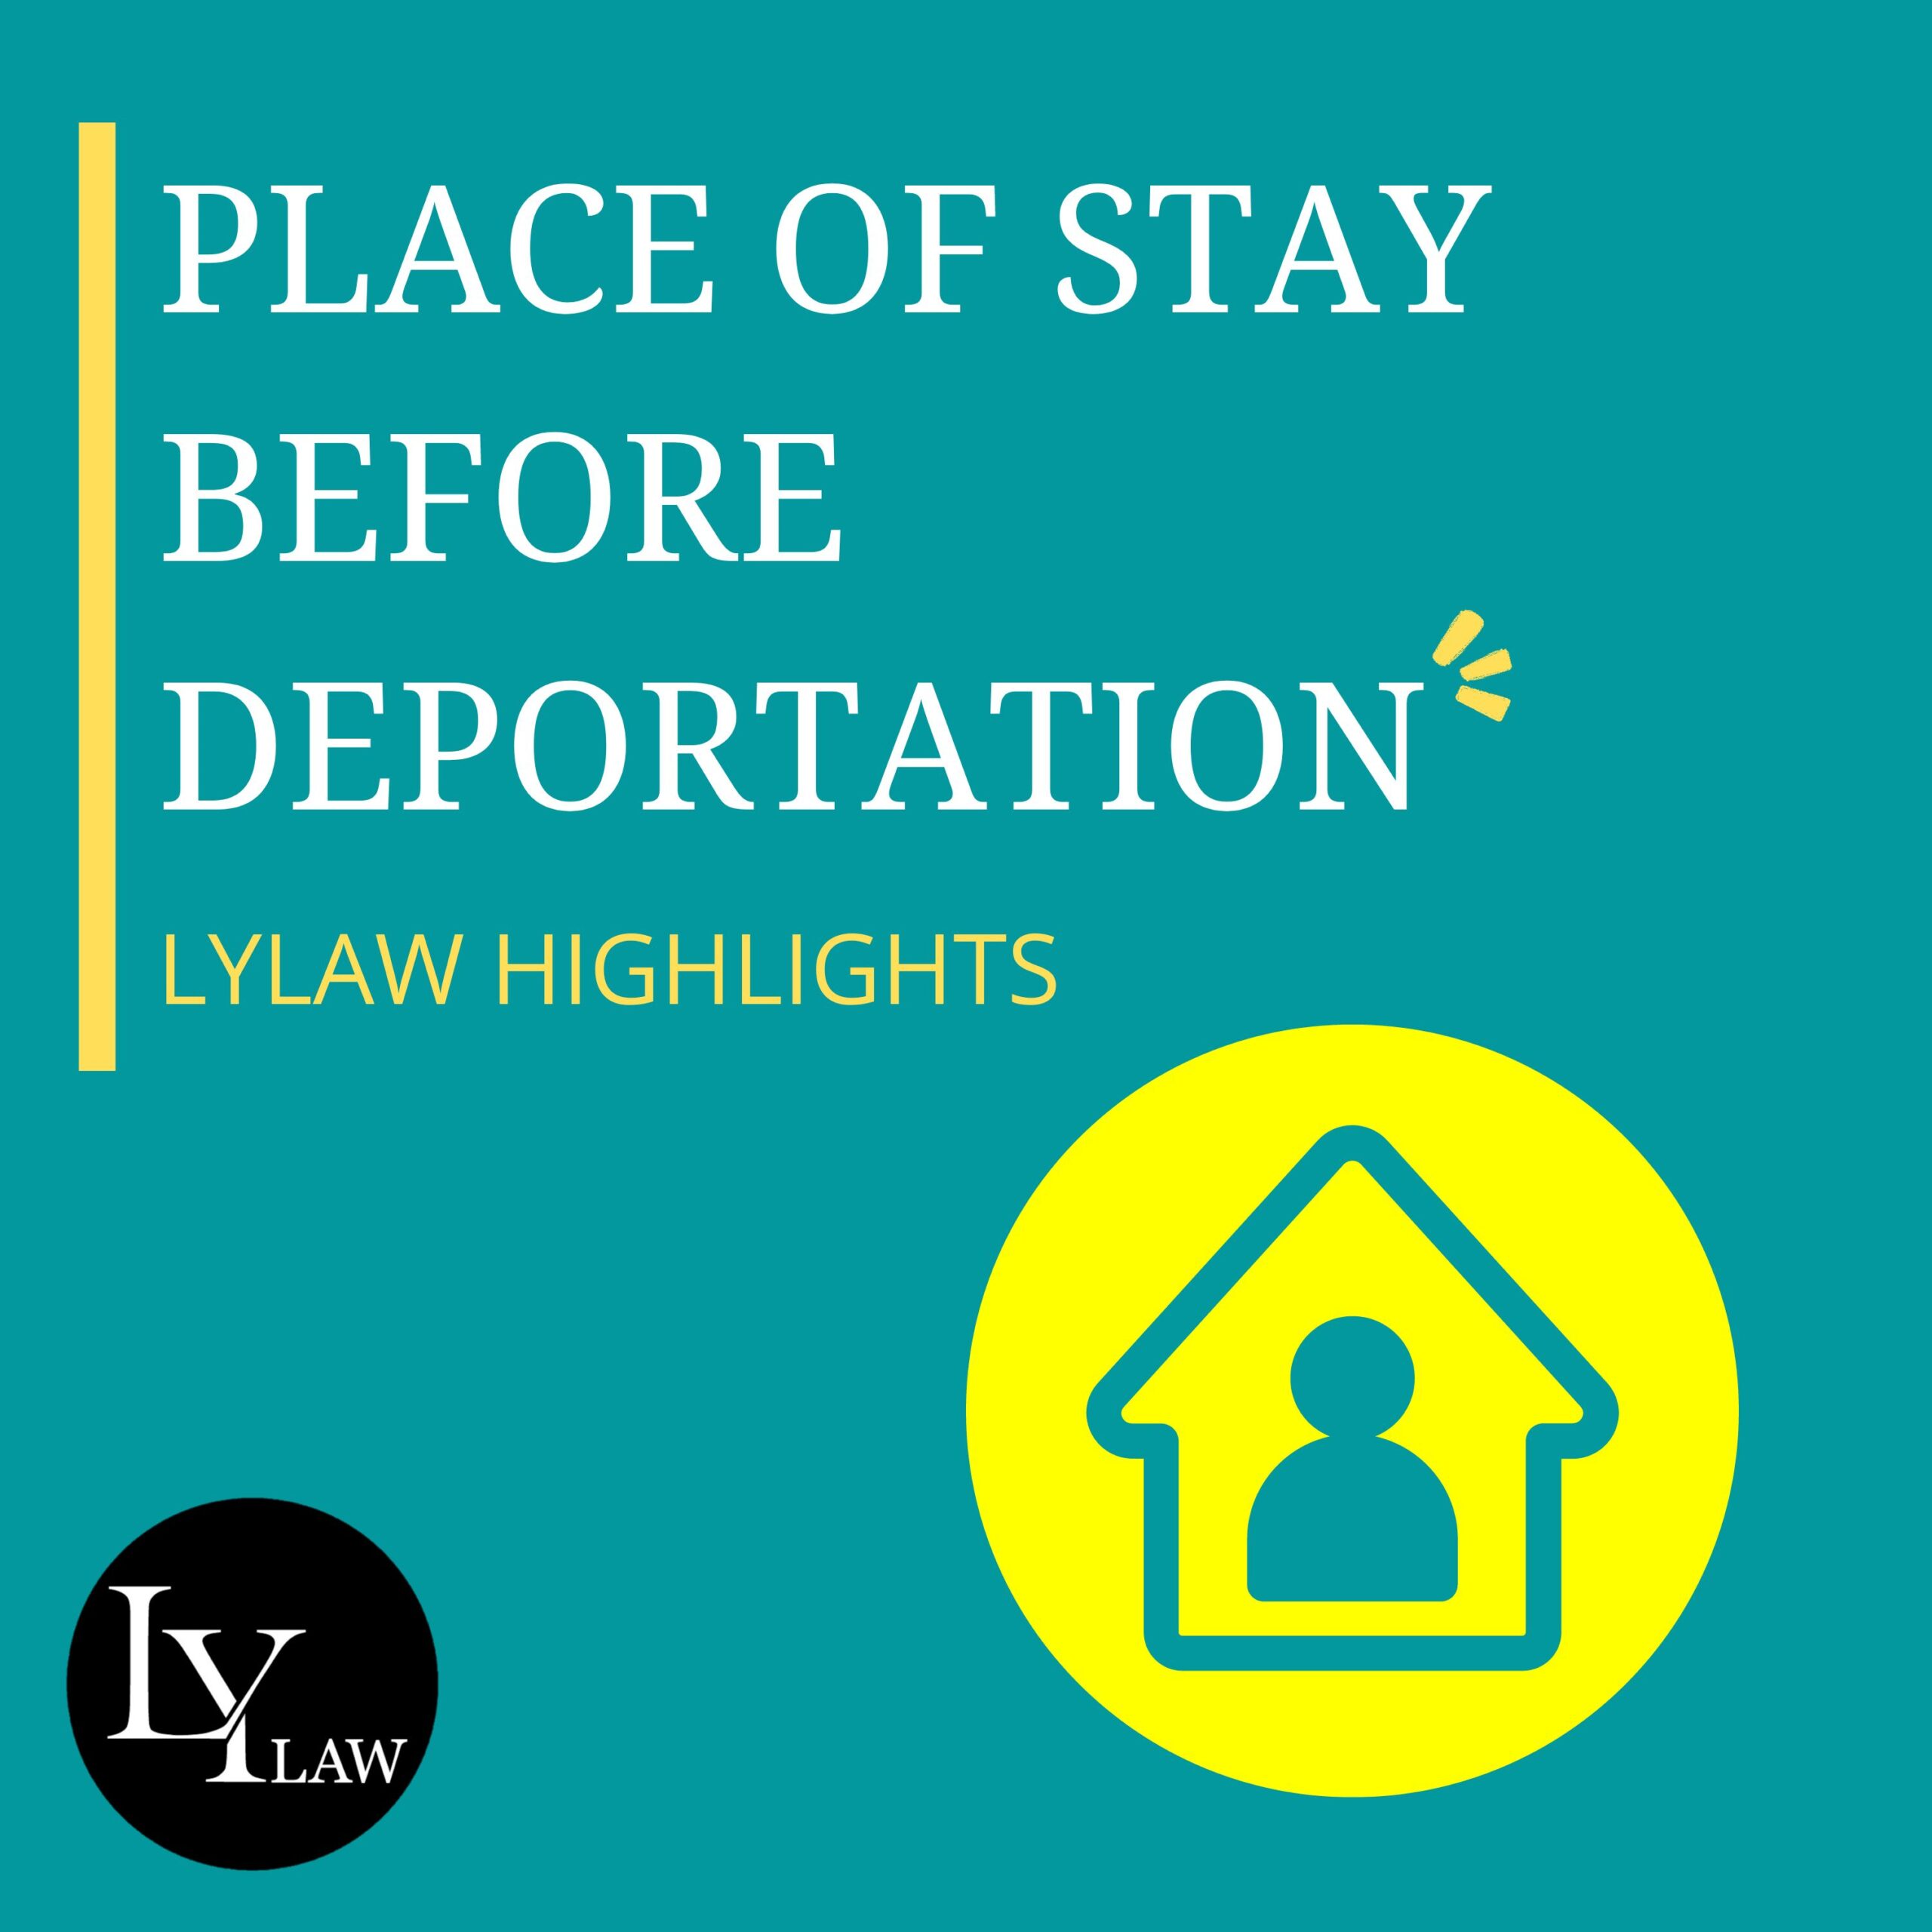 Place of stay before deportation